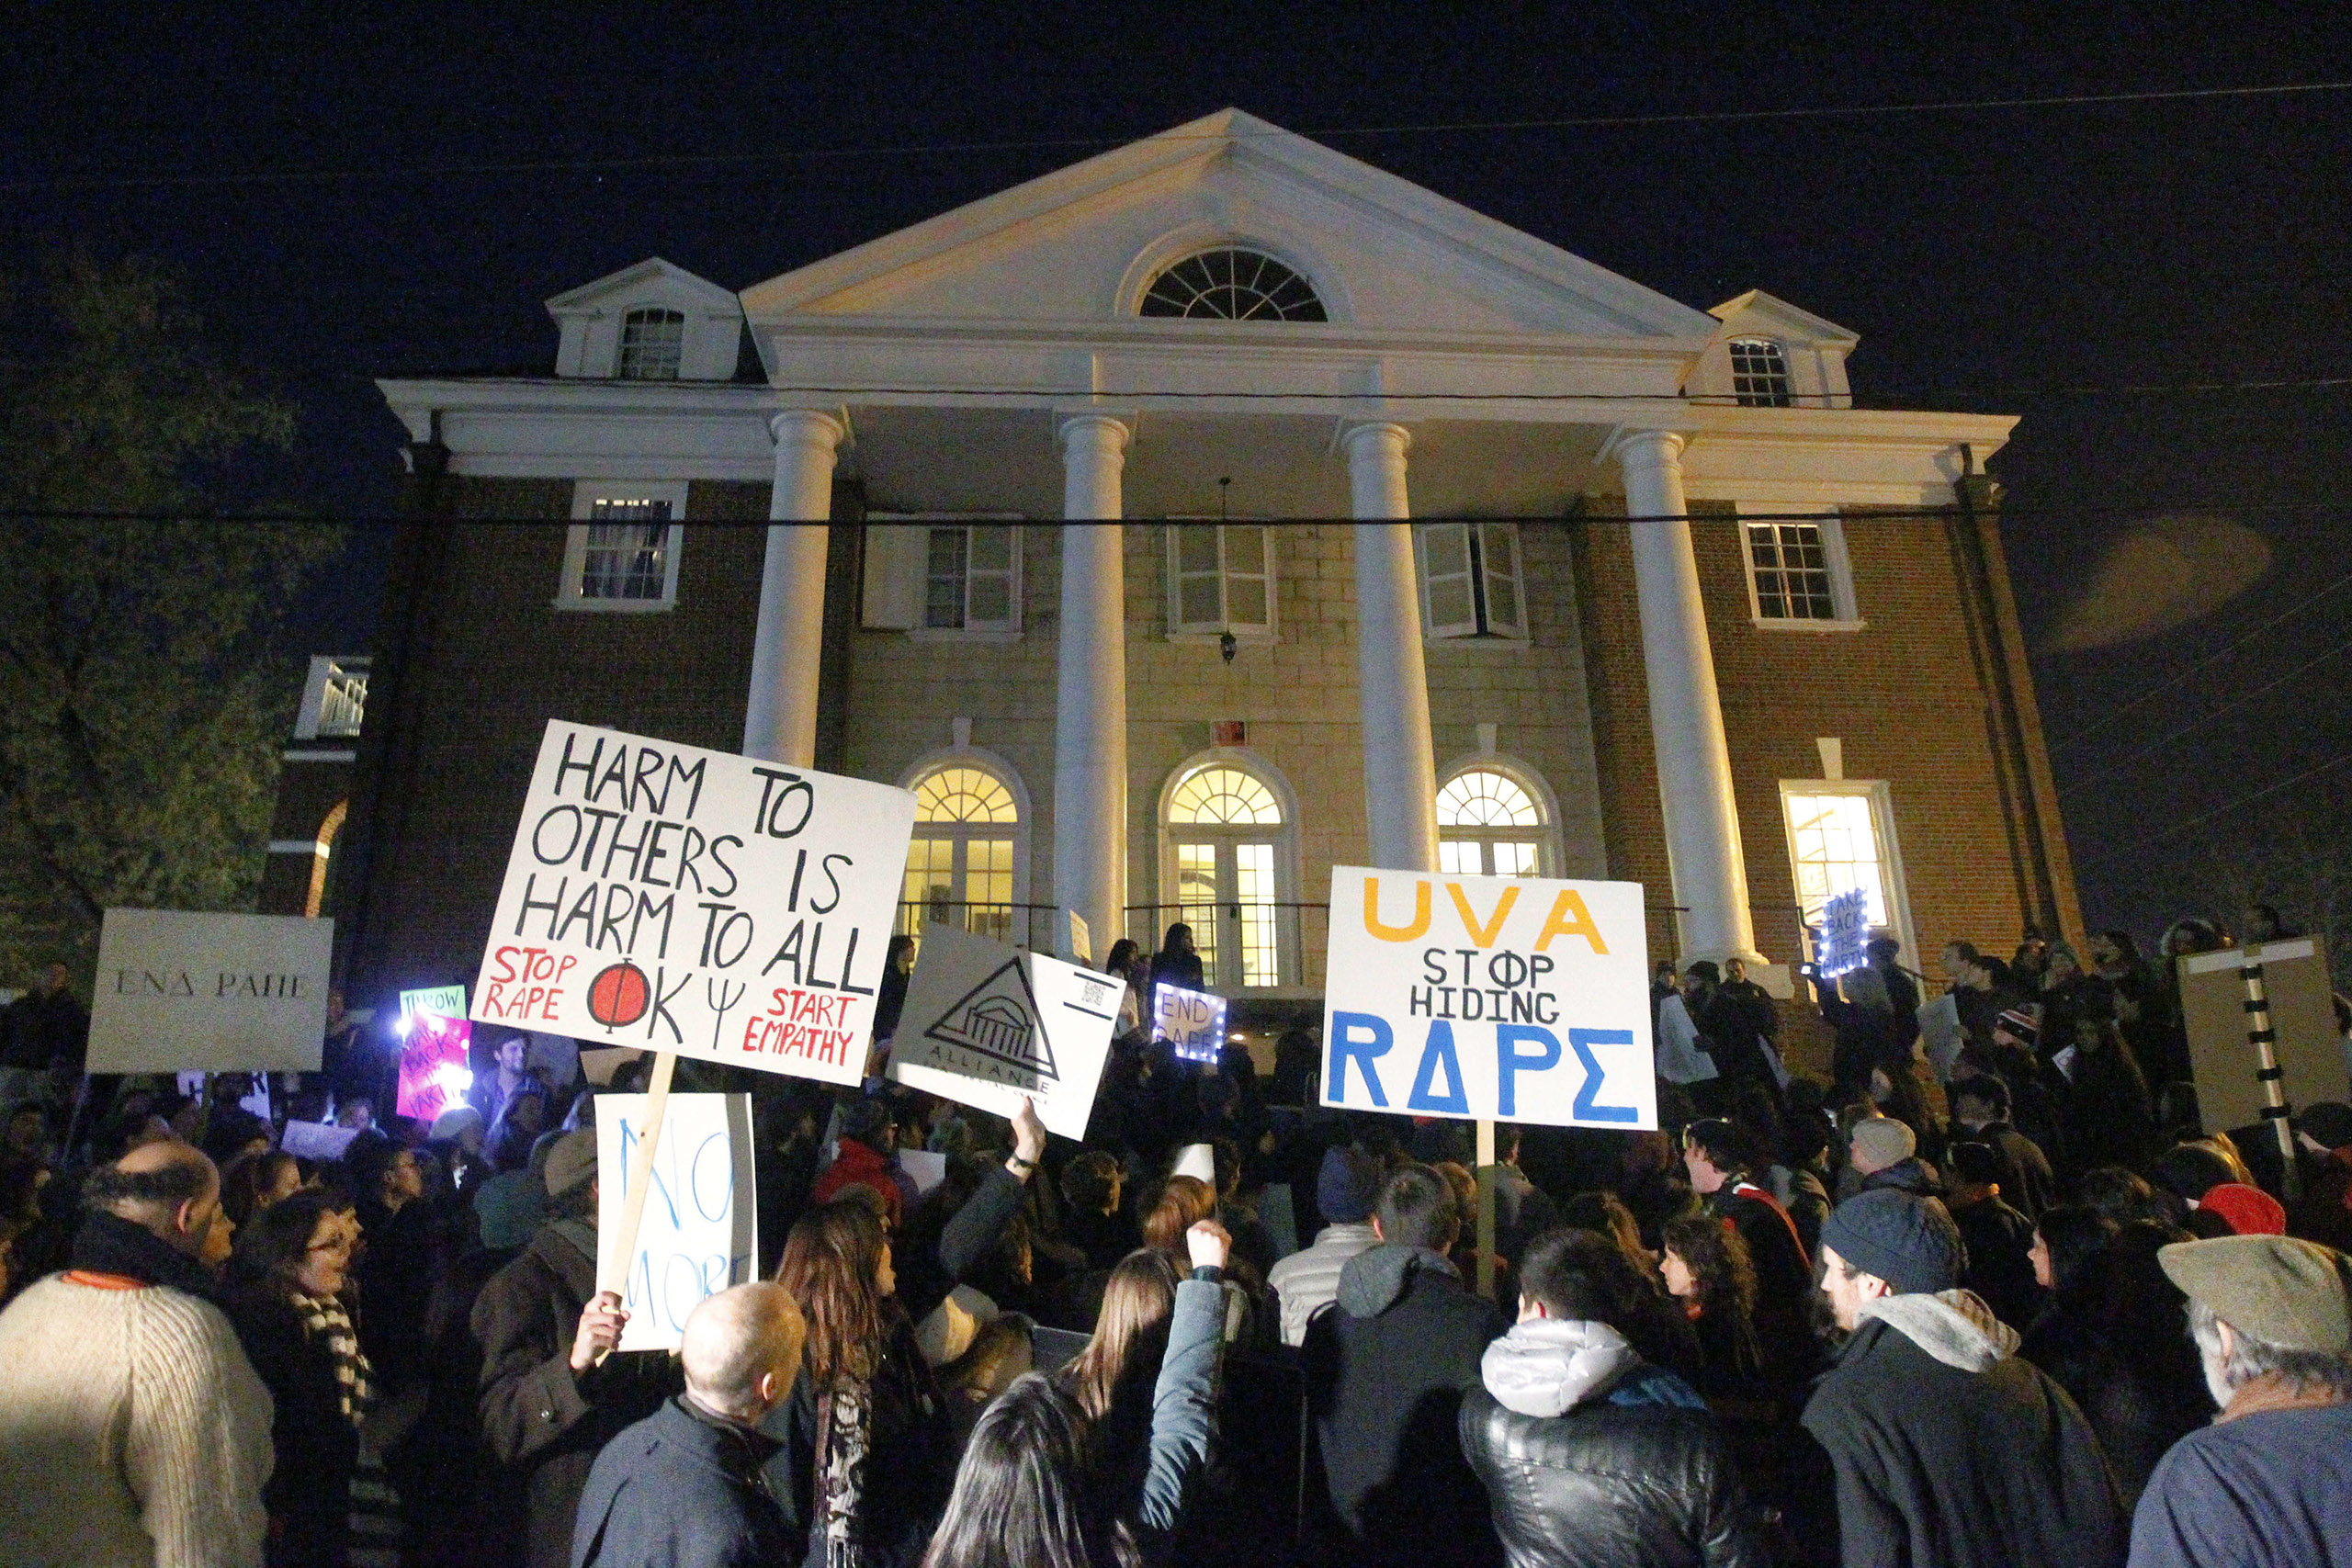 Protesters gather in front of the Phi Kappa Psi fraternity house at the University of Virginia on Nov. 22 (Ryan M. Kelly—AP)